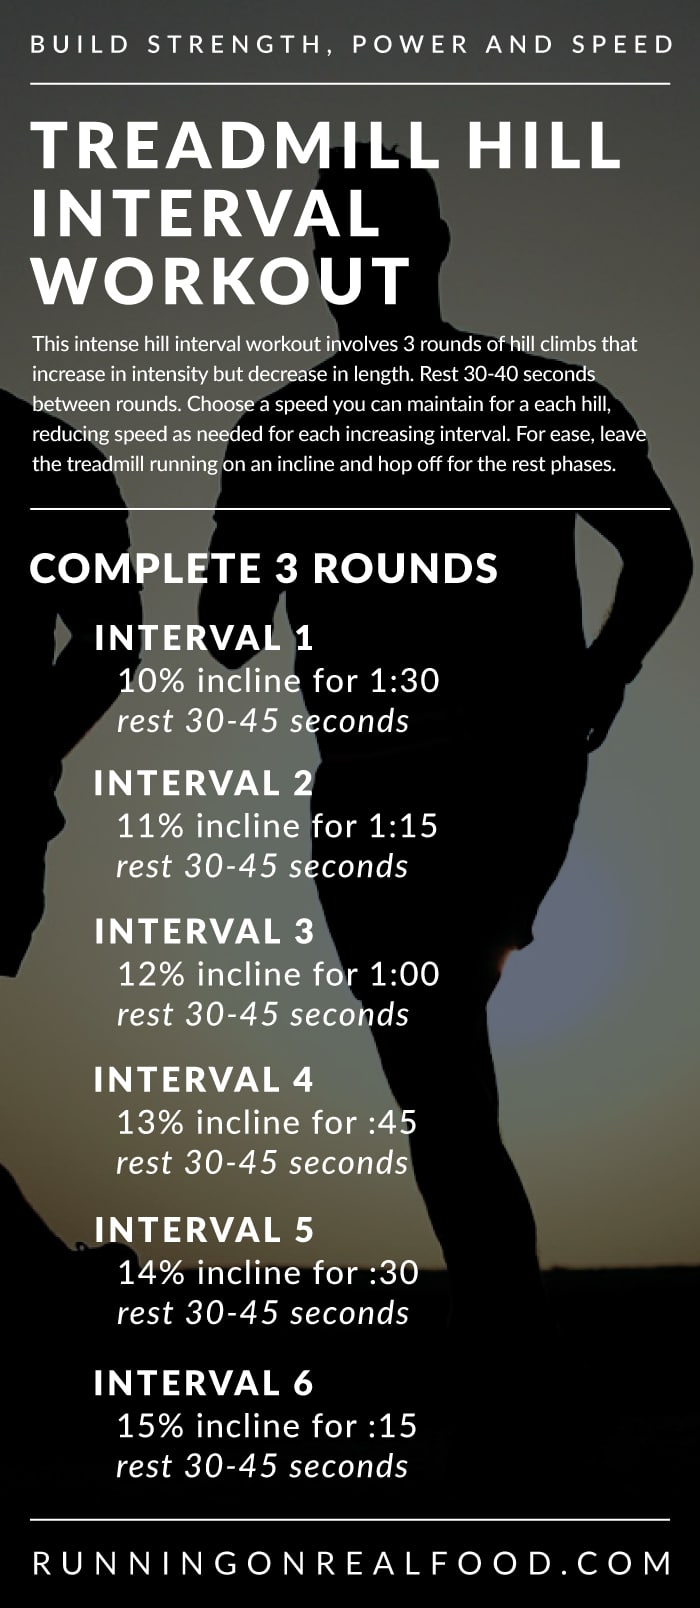 Treadmill Hill Interval Training Workout for Speed, Power and Endurance